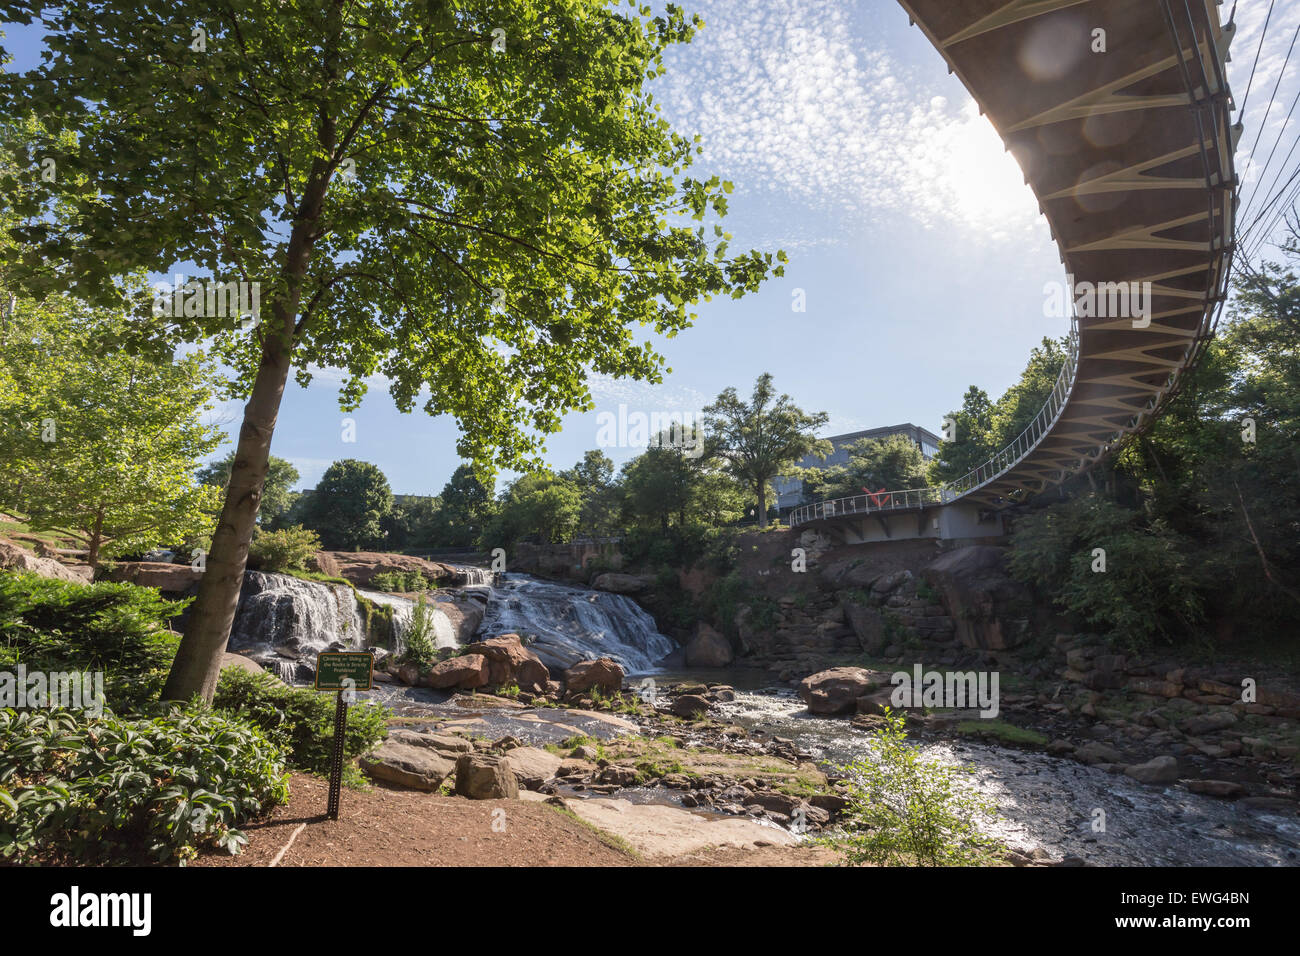 The Liberty bridge, a curved suspension bridge, crosses the Reedy River falls in beautiful and exciting downtown Greenville, SC. Stock Photo